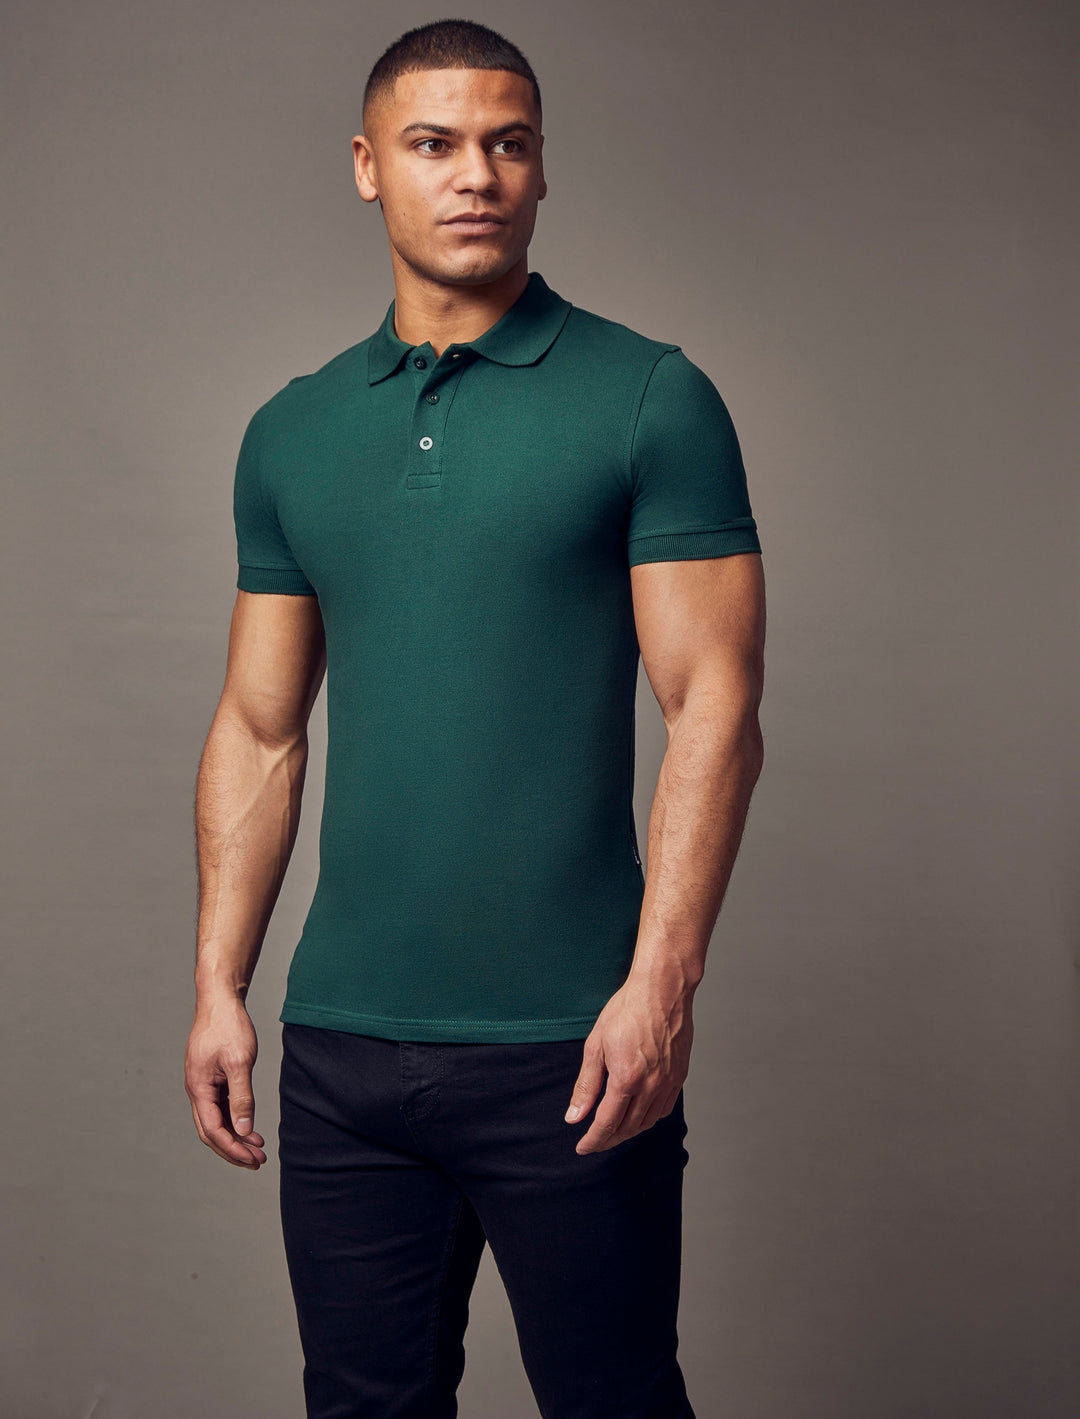 A green polo shirt with short sleeves from Tapered Menswear, designed in a tapered fit to accentuate the muscle-fit features for a sleek and defined look.